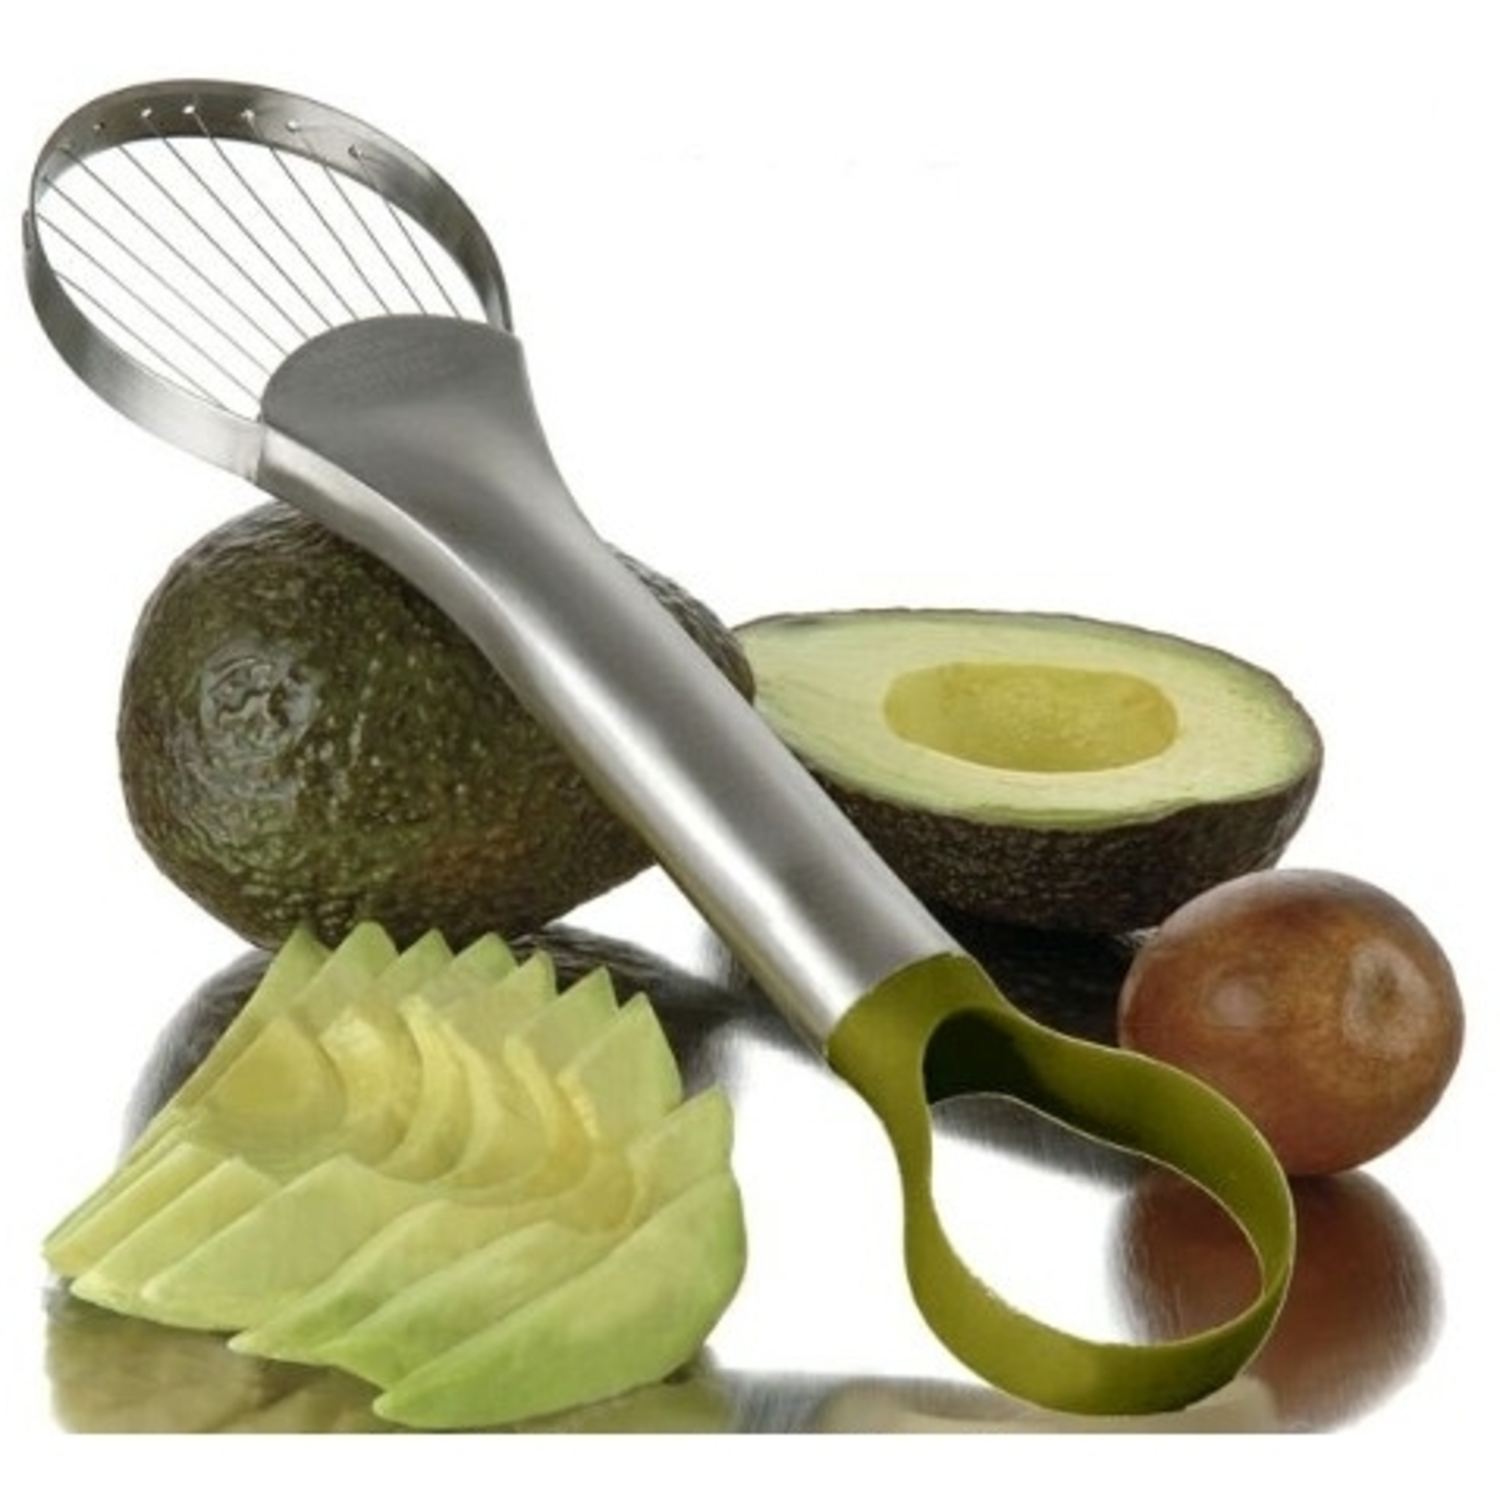 Avocado Slicer,Avocado Pit Remover Cutter/Peeler,Well Made Stainless Steel Avocado Slicer and Pitter Tool,Really Cutting Thin Slices,The Best Holiday